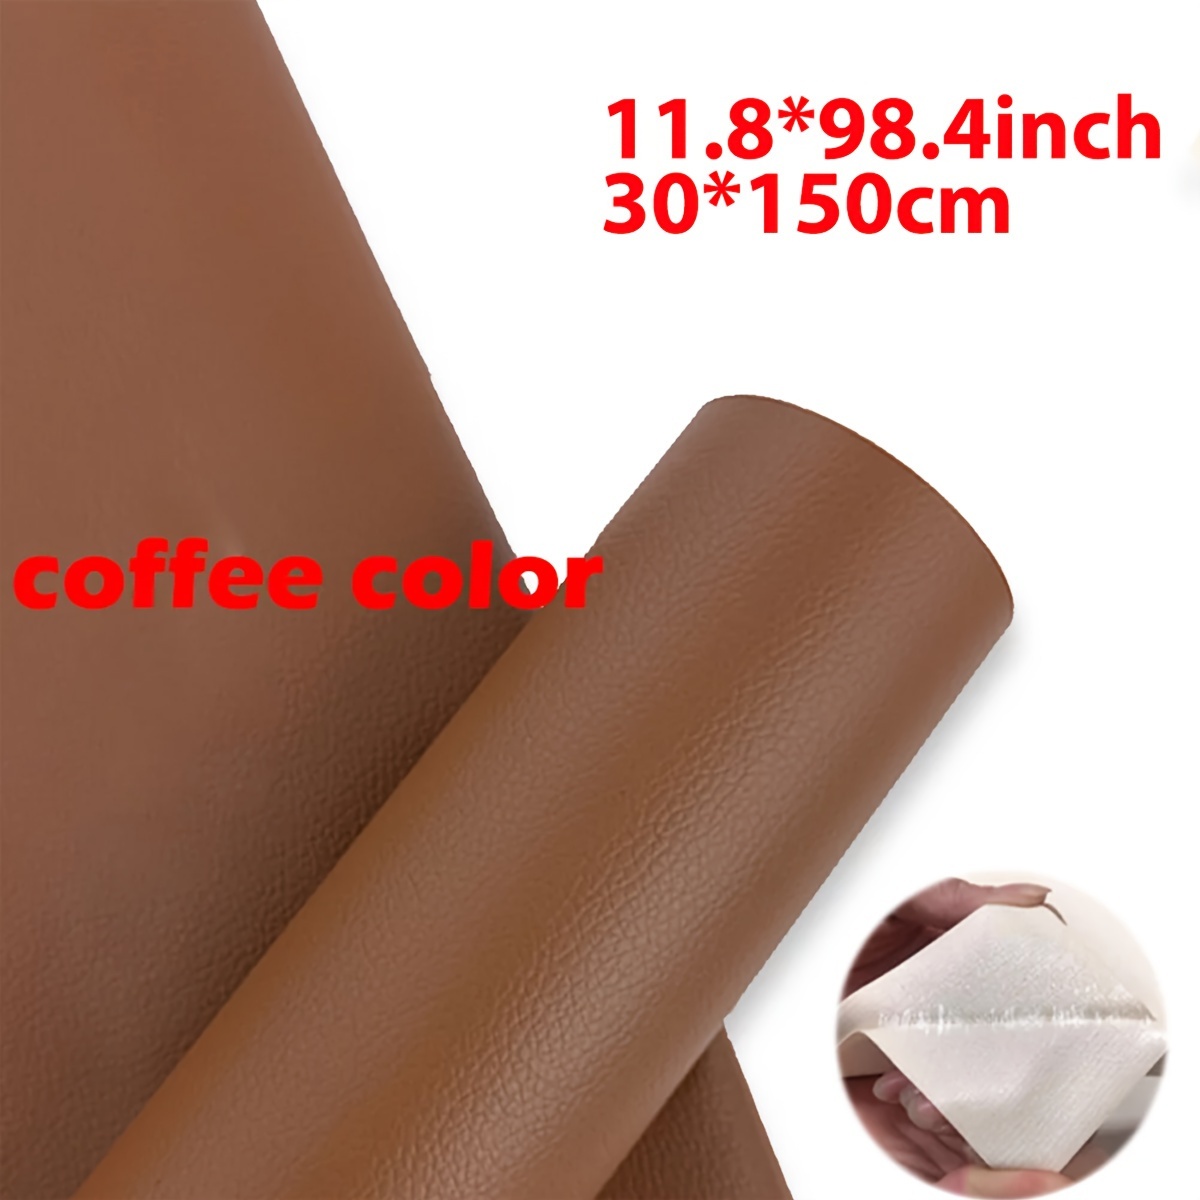 Leather Repair Patch - 60x137CM Self Adhesive Cuttable Strong